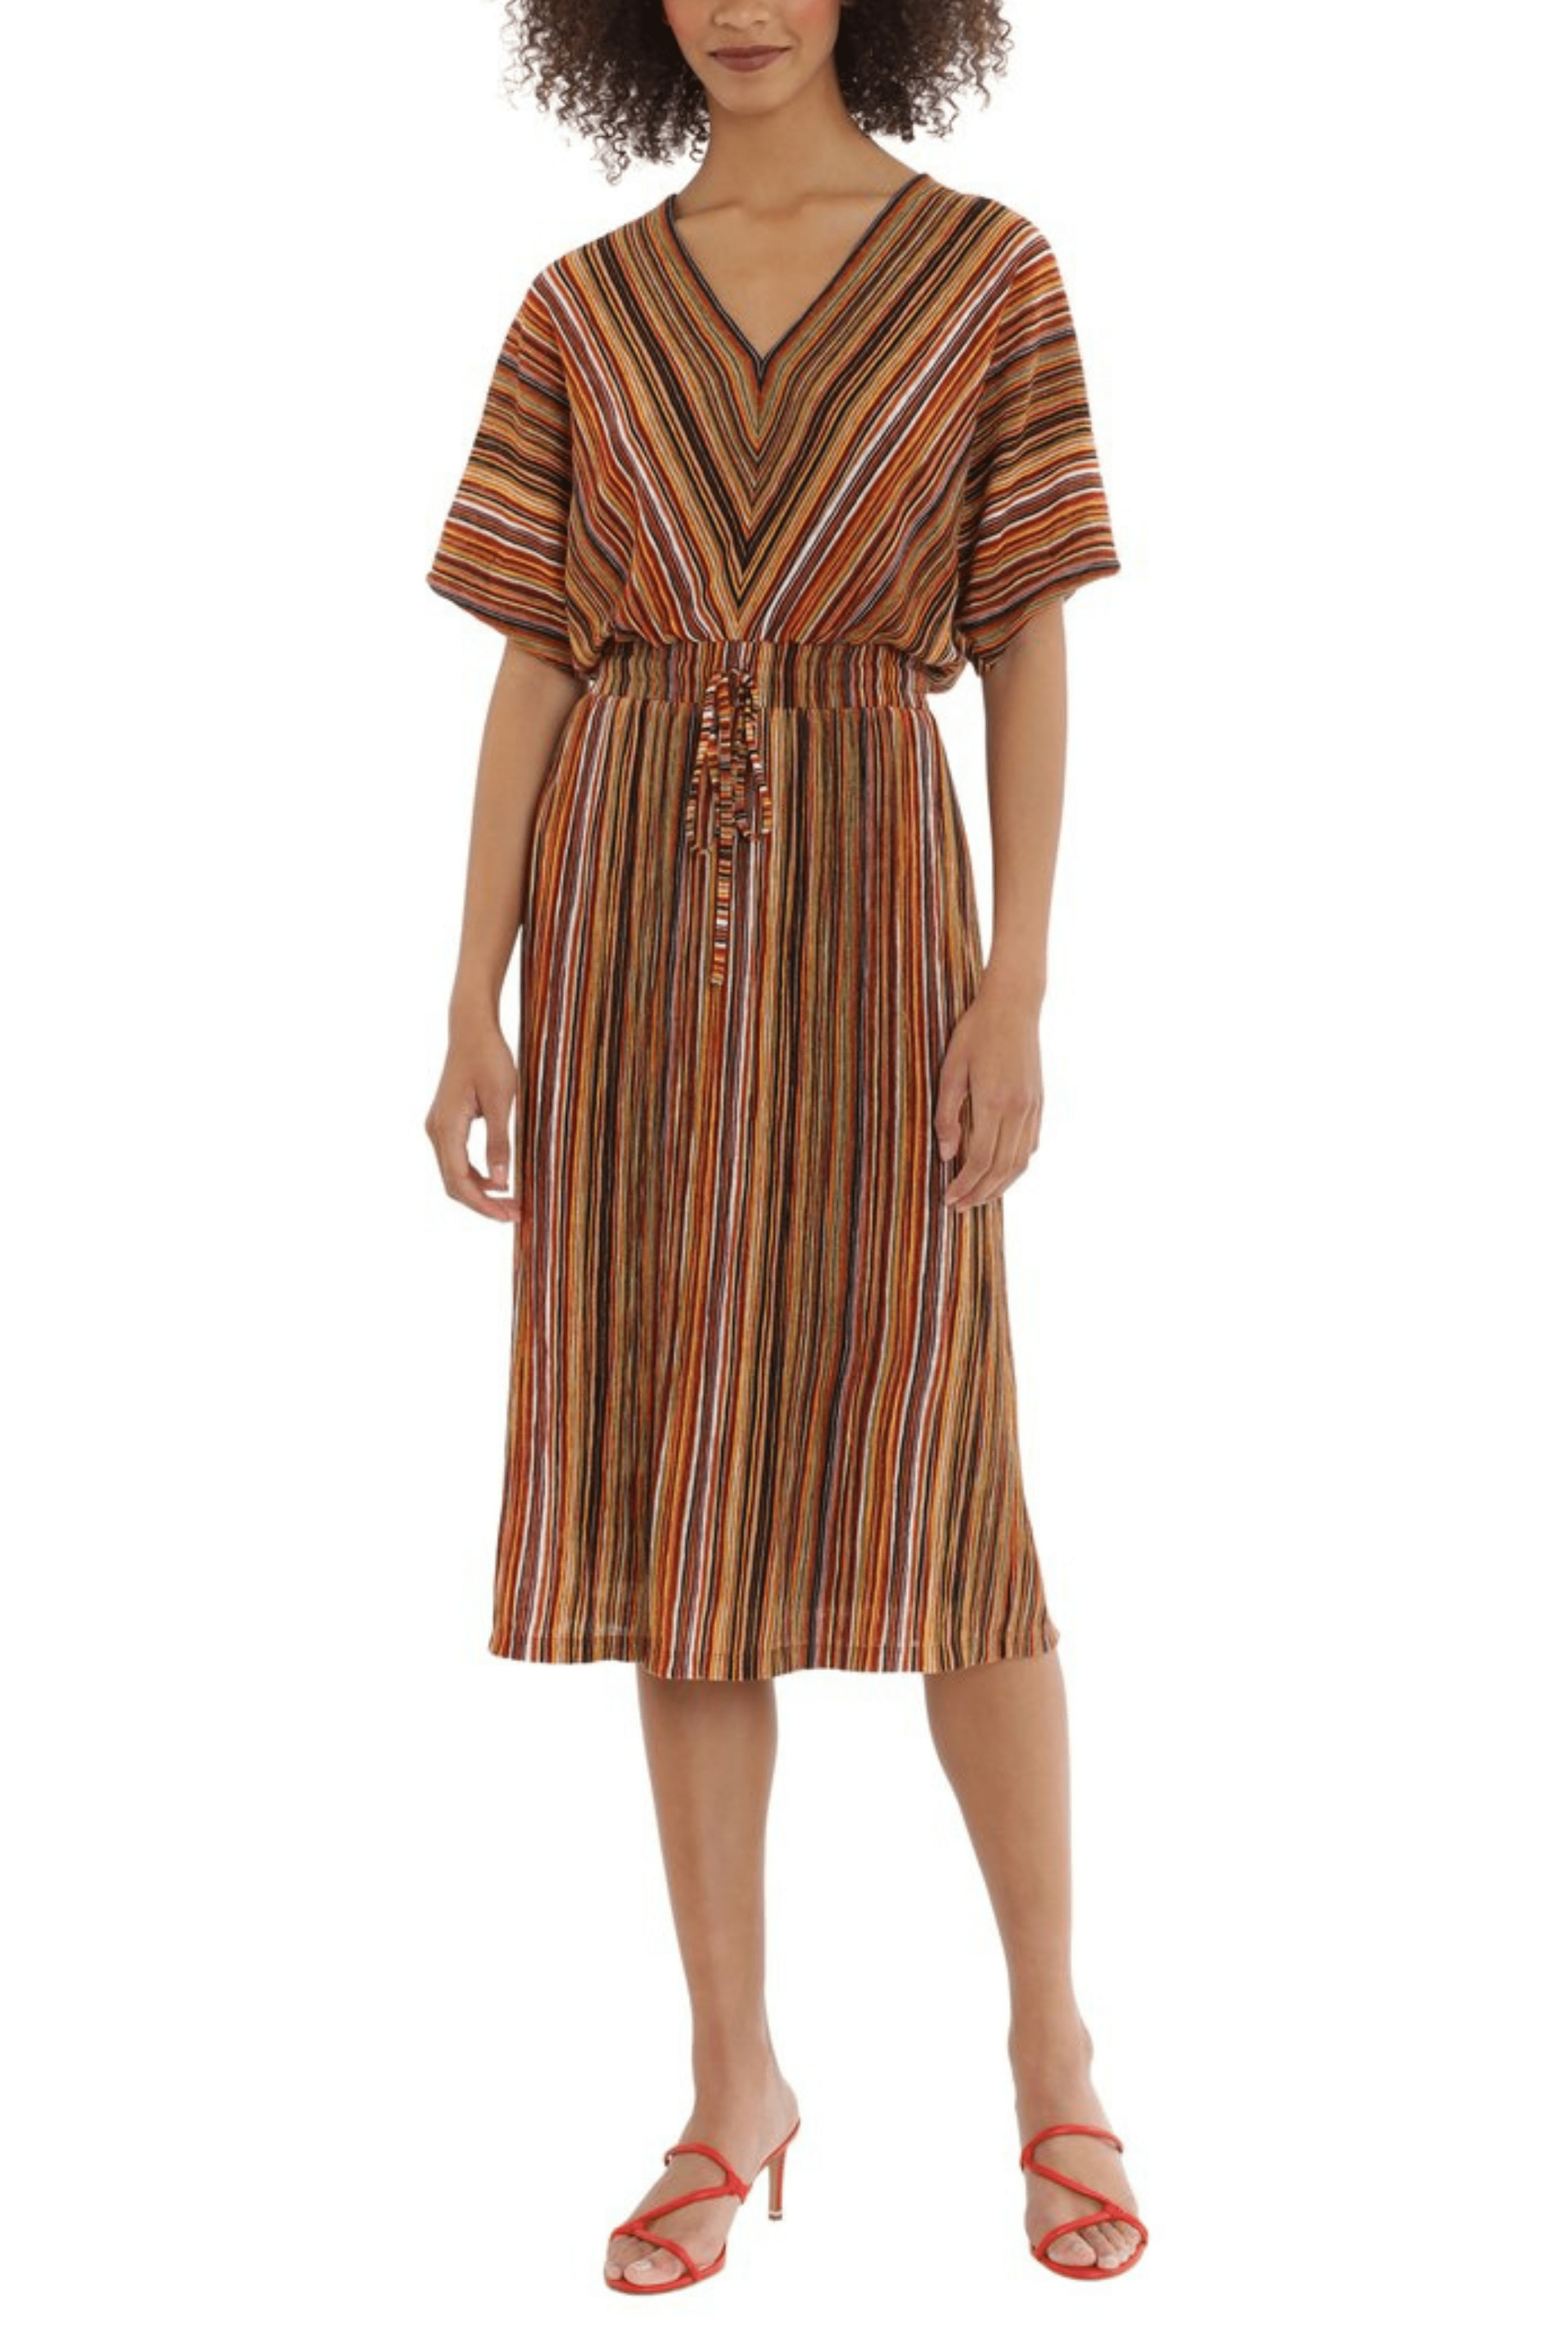 V-neck Striped Print Elasticized Natural Waistline Cocktail Above the Knee Fitted Keyhole Short Sleeves Sleeves Sheath Sheath Dress/Evening Dress/Mother-of-the-Bride Dress/Prom Dress